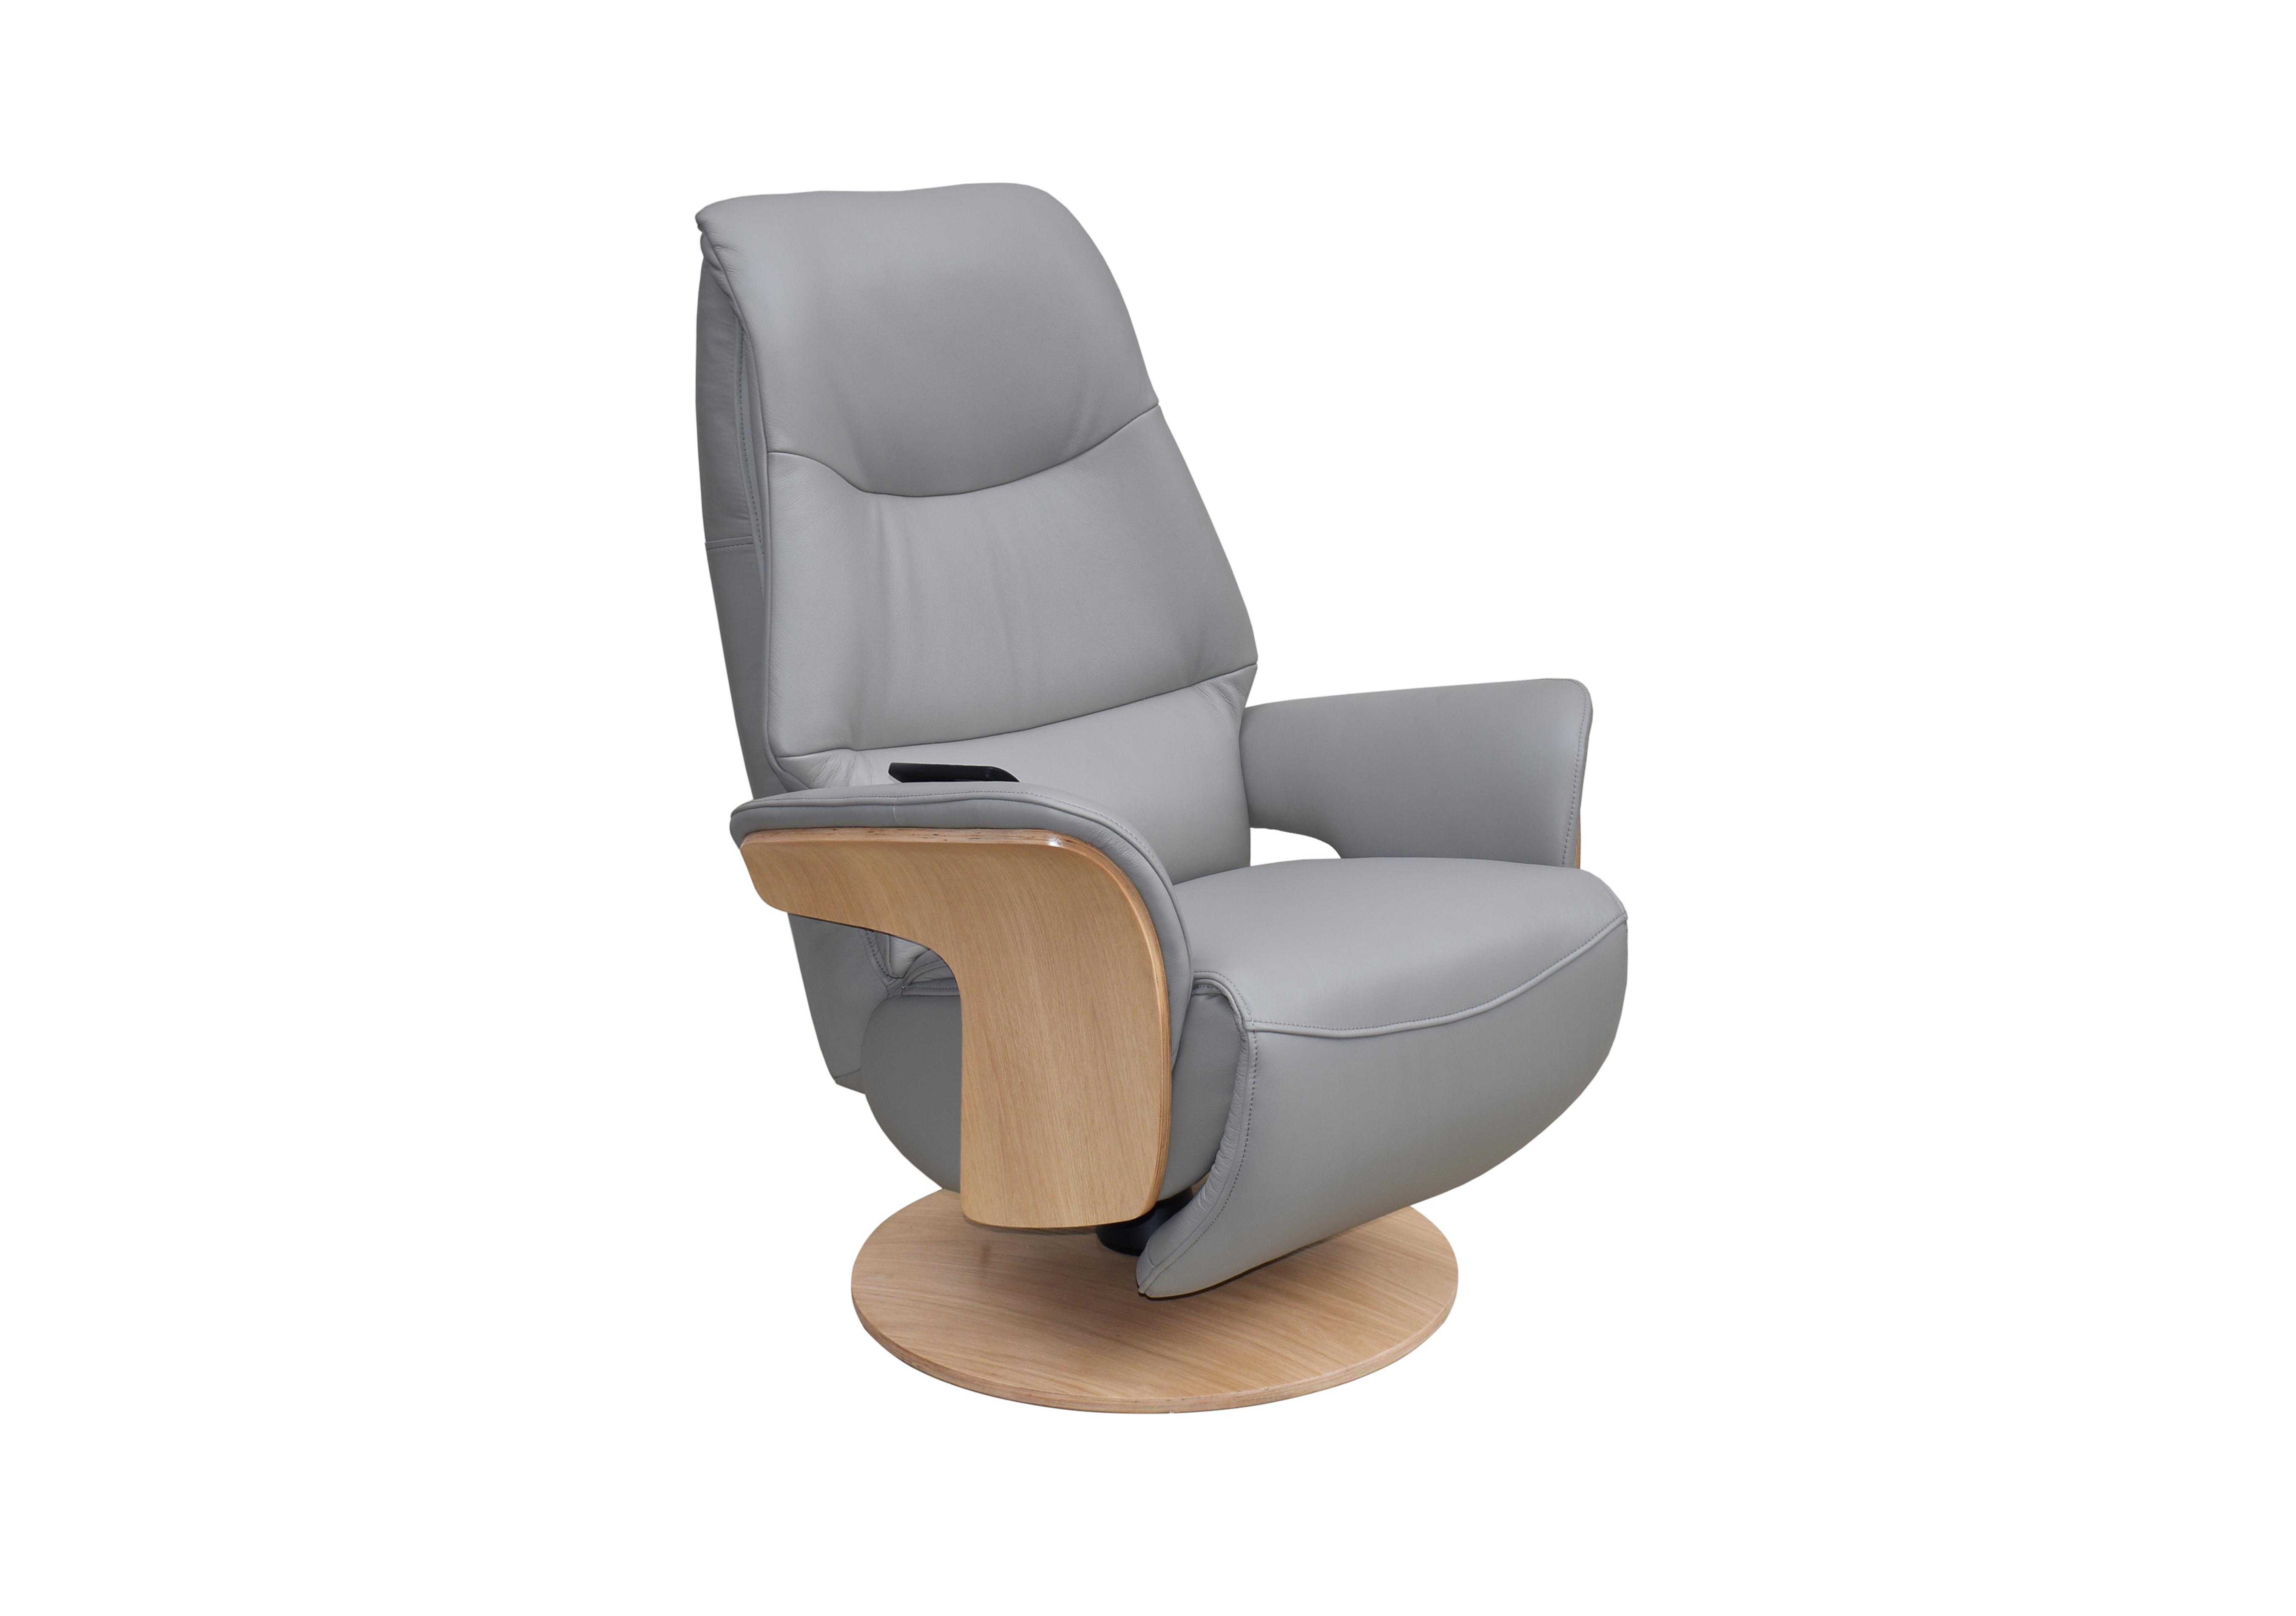 Olaf Leather Look Swivel Recliner Chair in Pale Grey on Furniture Village